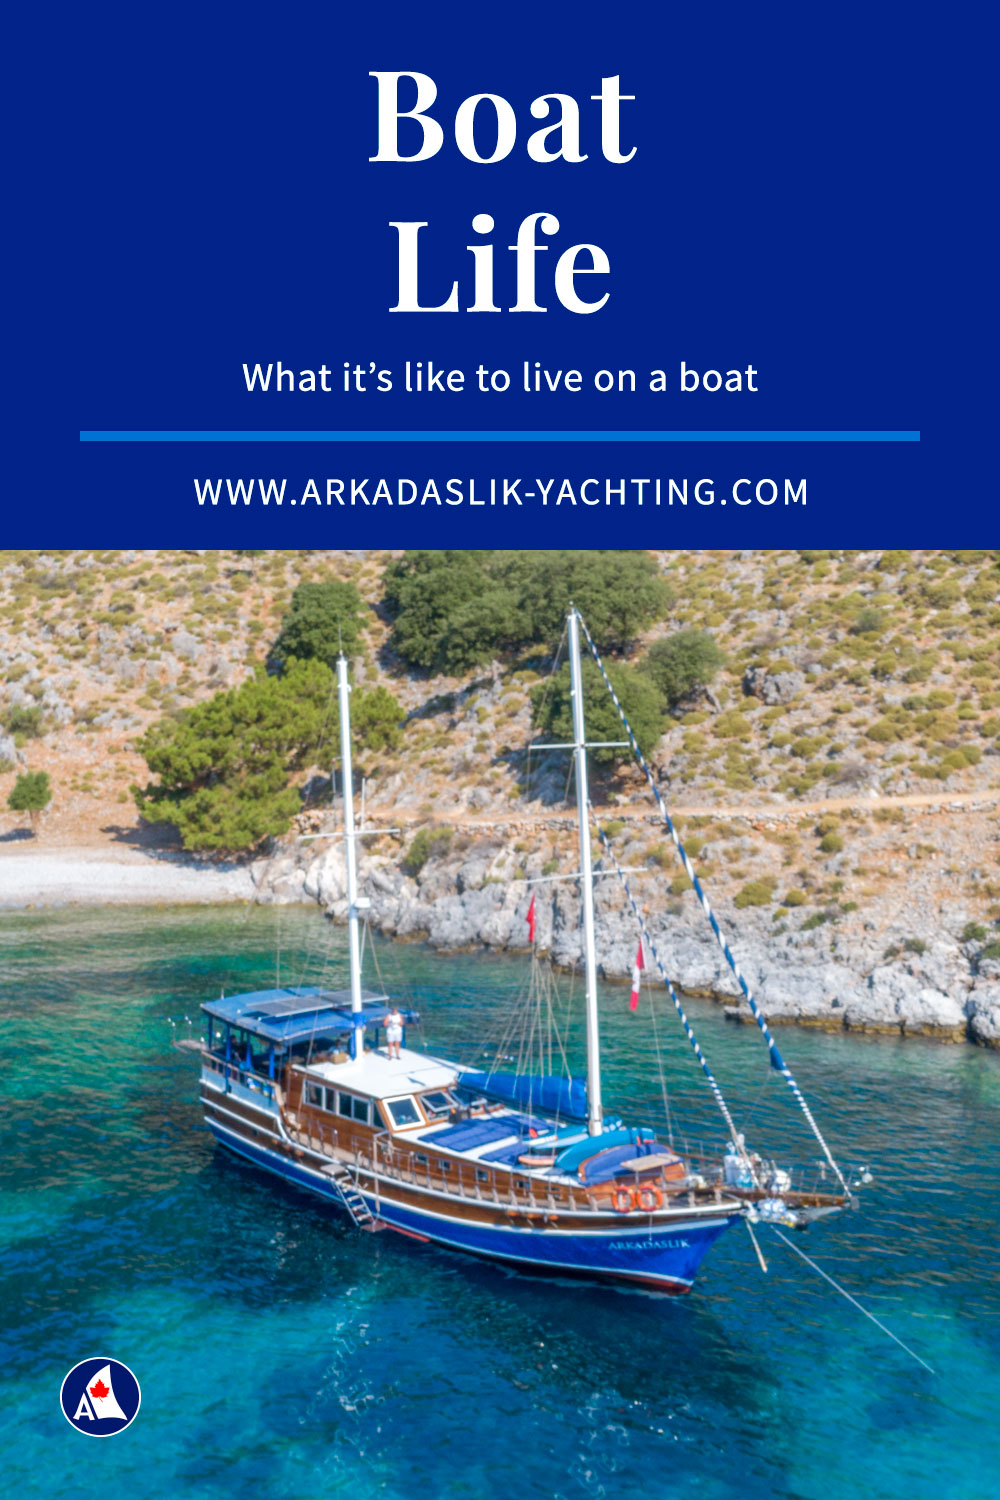 What's It Like to Live on a Boat? | Liveaboard Boat Life